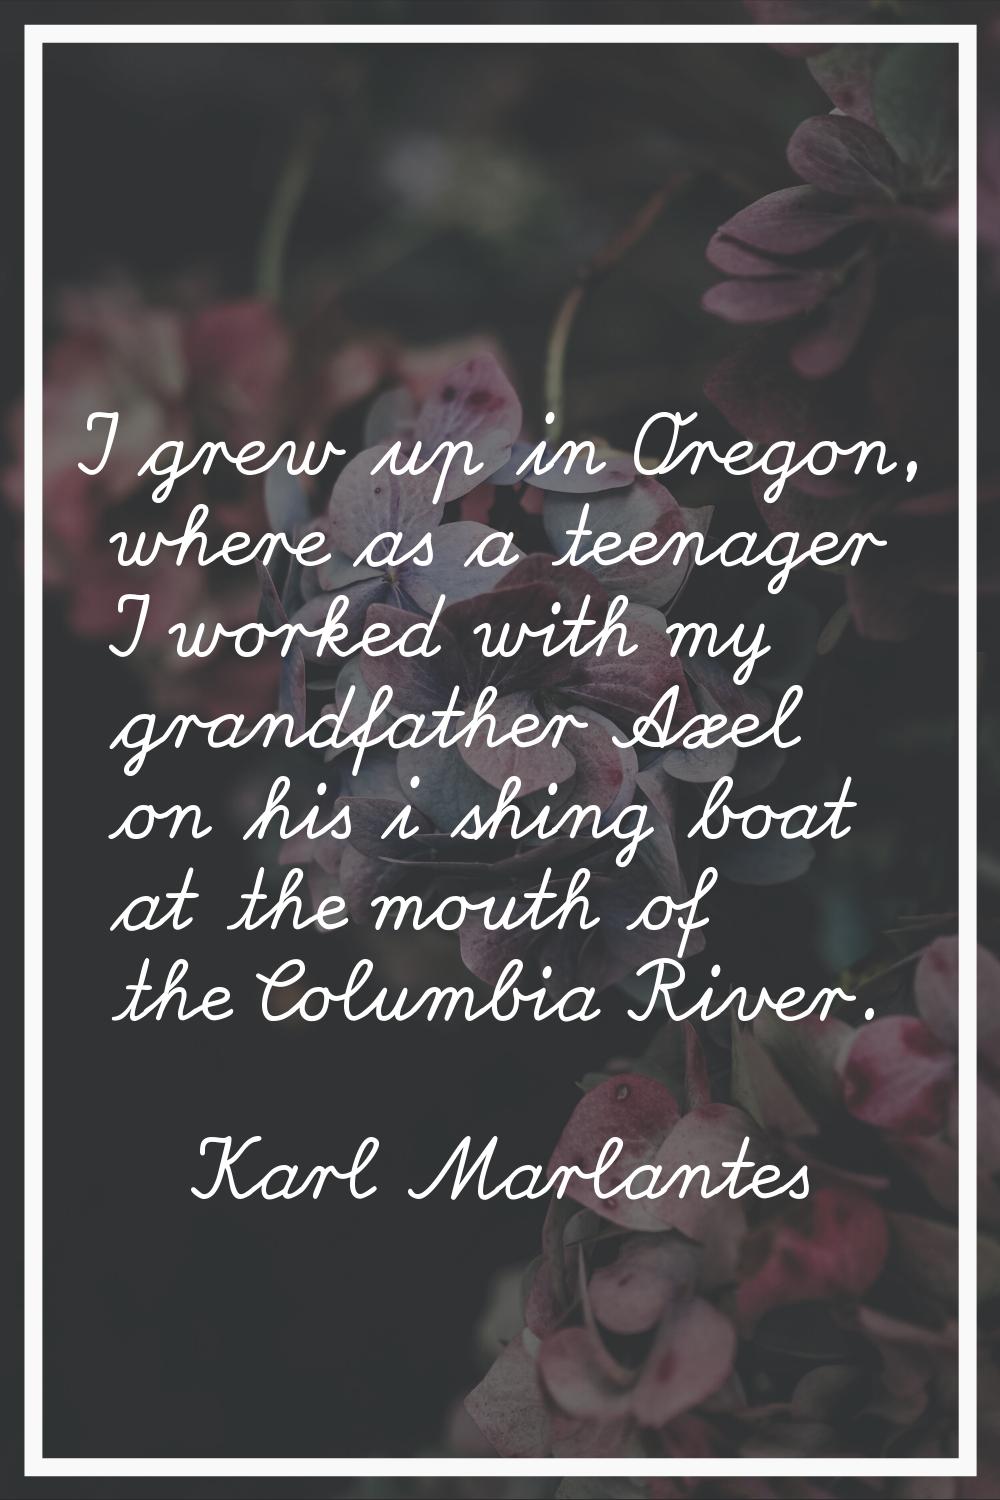 I grew up in Oregon, where as a teenager I worked with my grandfather Axel on his i shing boat at t